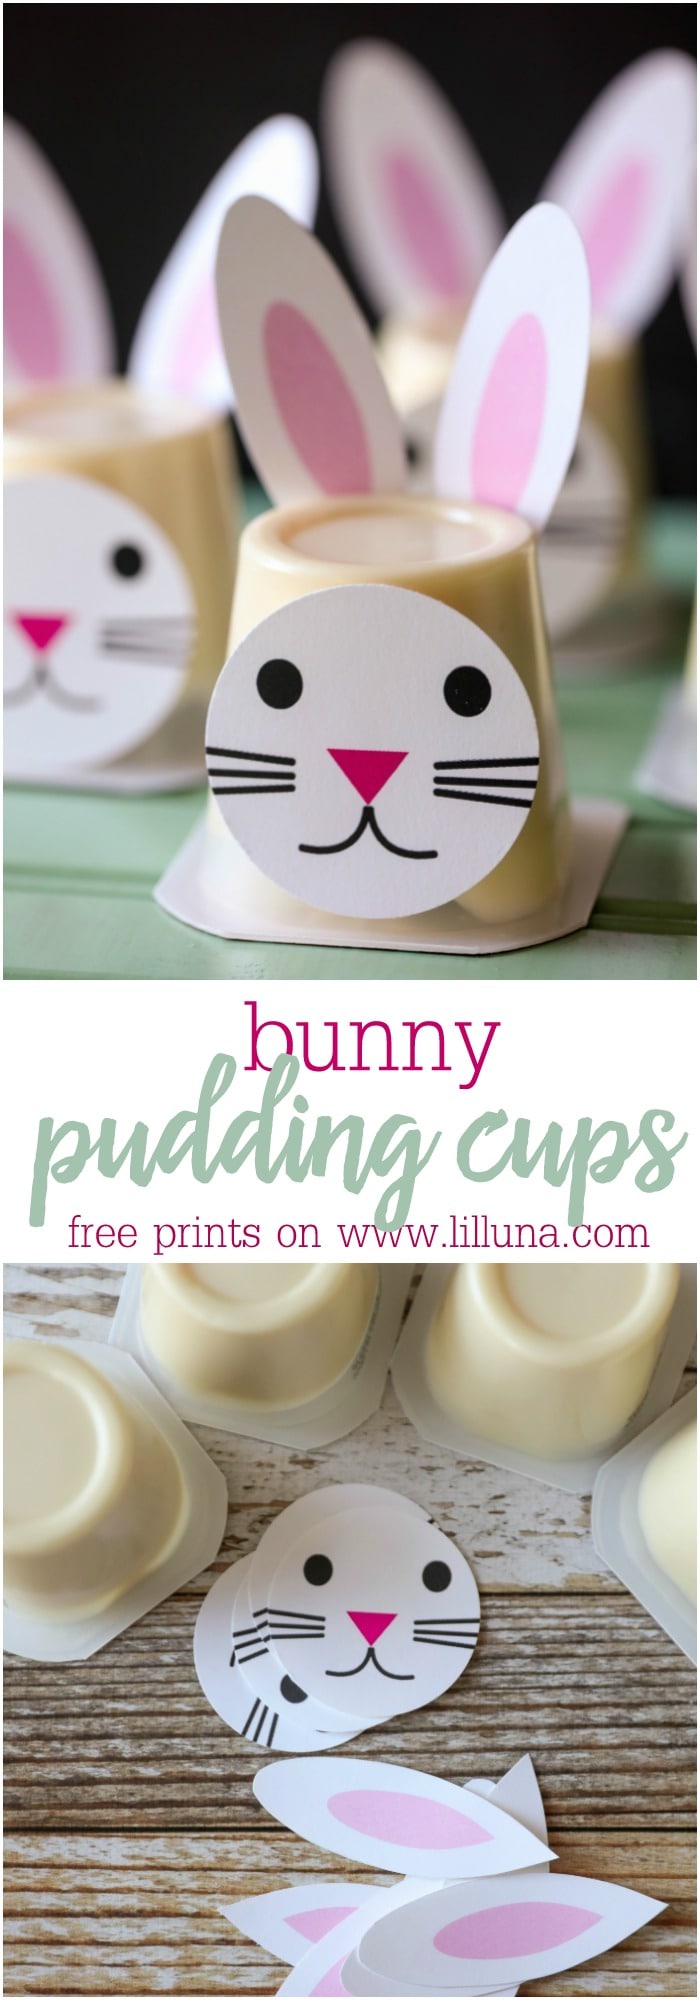 Easter Bunny Pudding Cups!! Such a cute idea for Easter parties and events. Get the free prints for these bunnies on lilluna.com